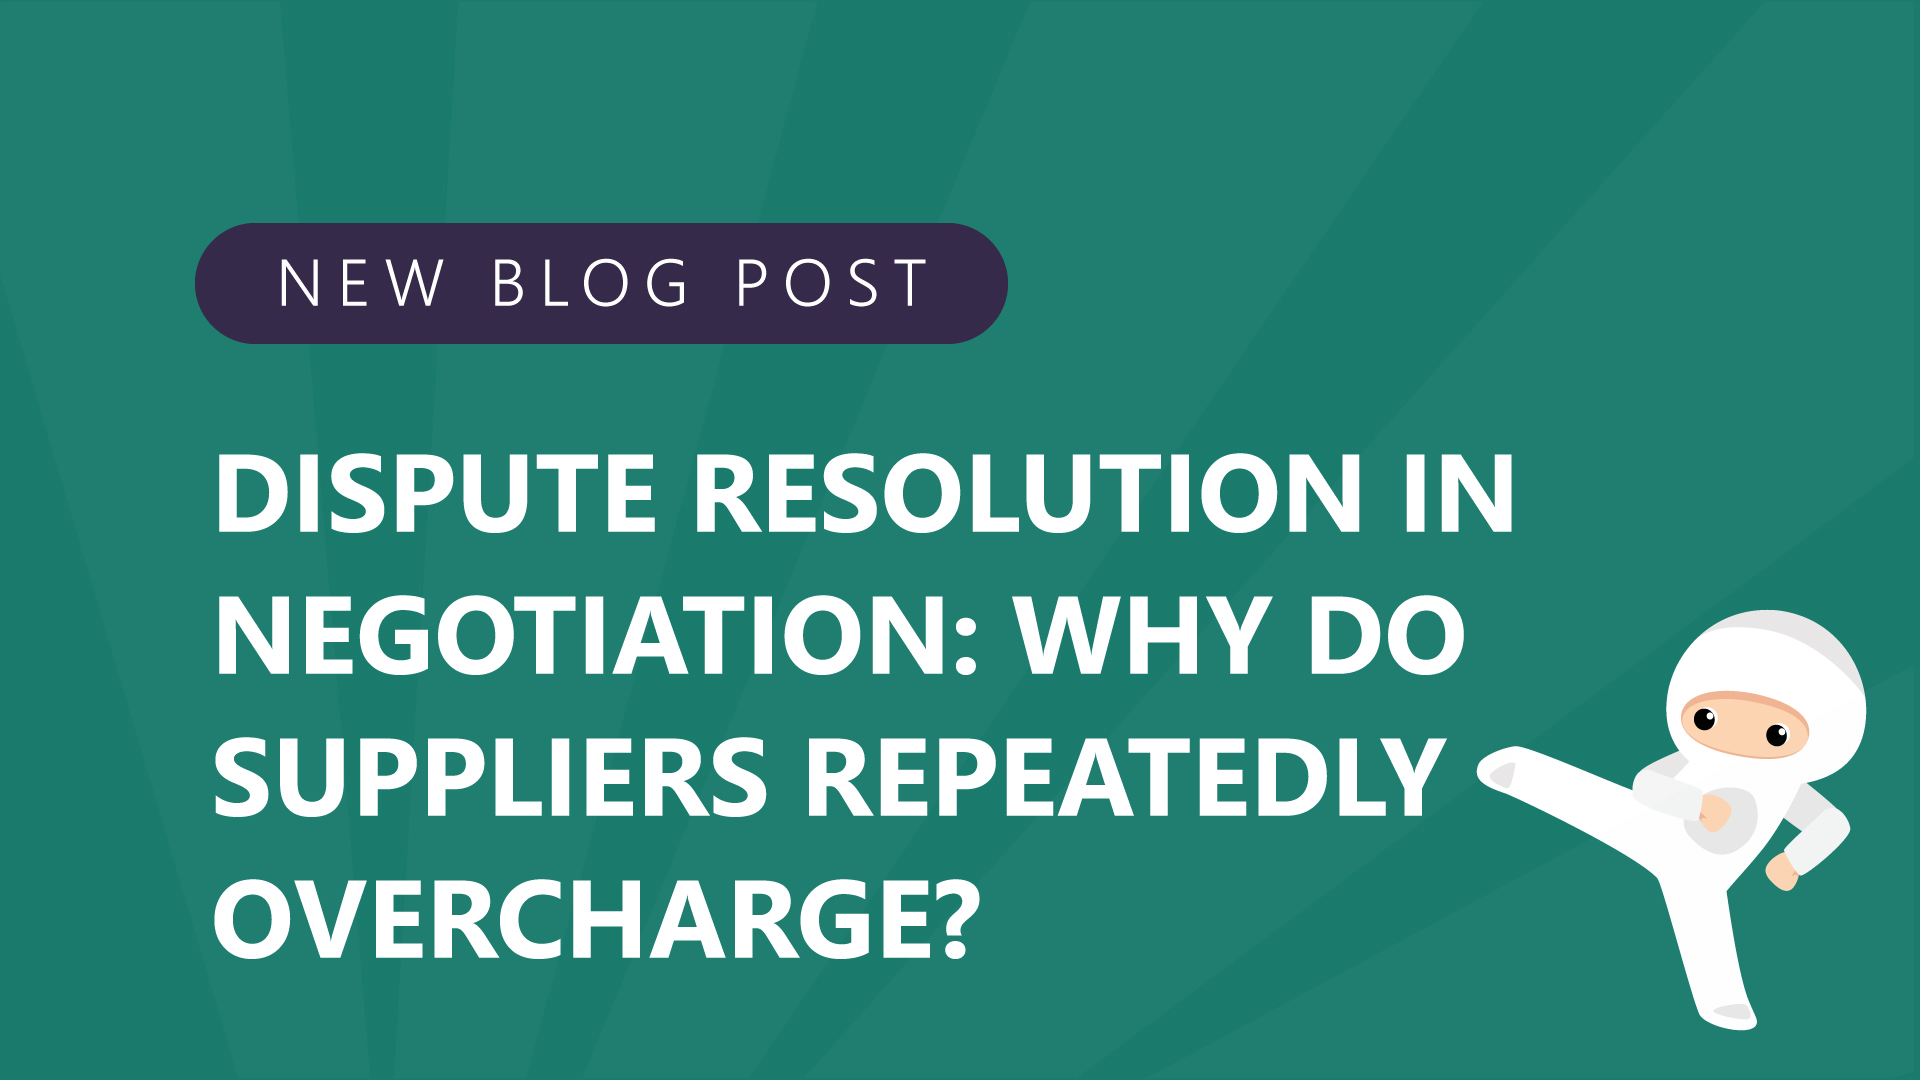 71 ispute resolution in negotiation why do suppliers repeatedly overcharge